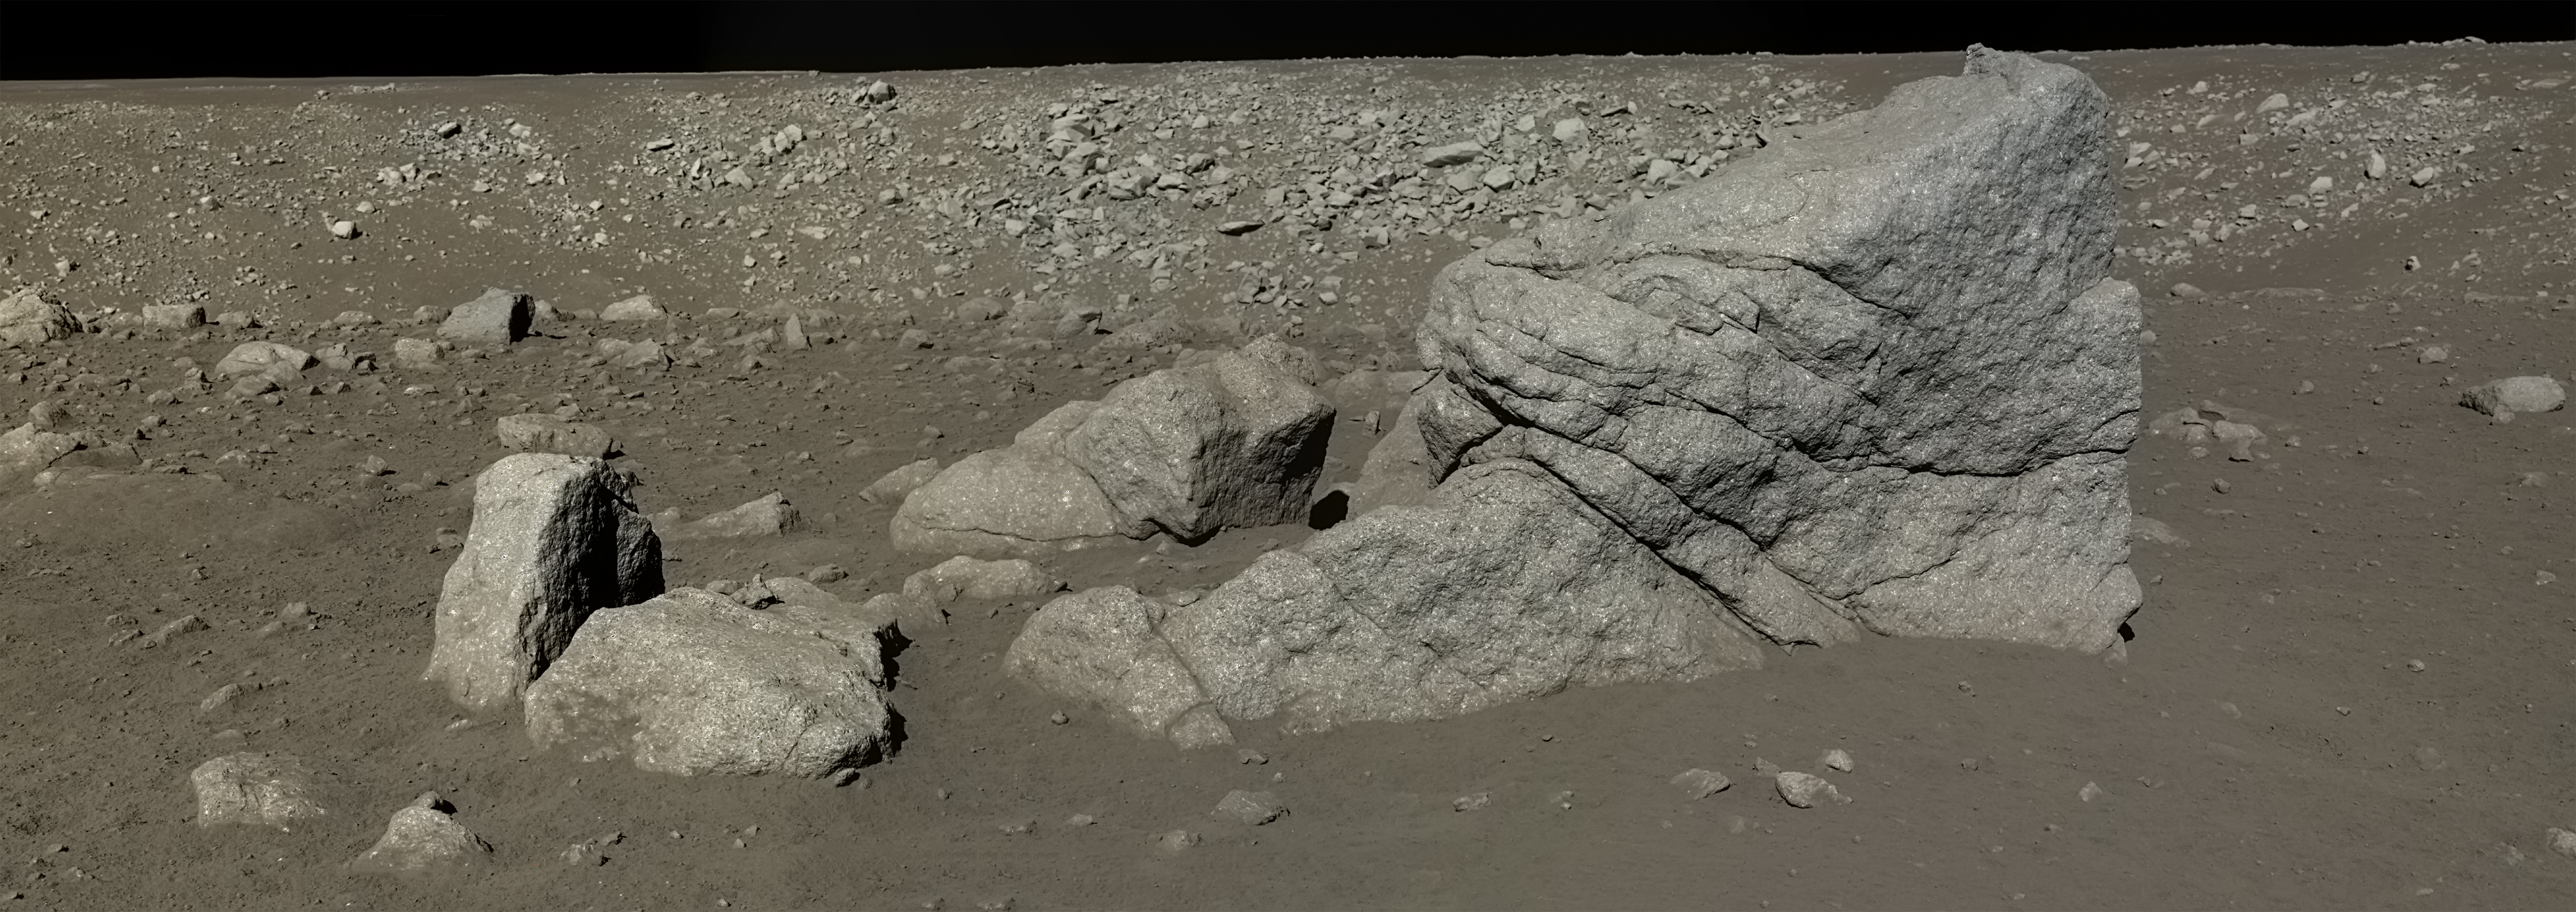 Panoramic iamge of a rock on the Moon Chang'e 3 lander